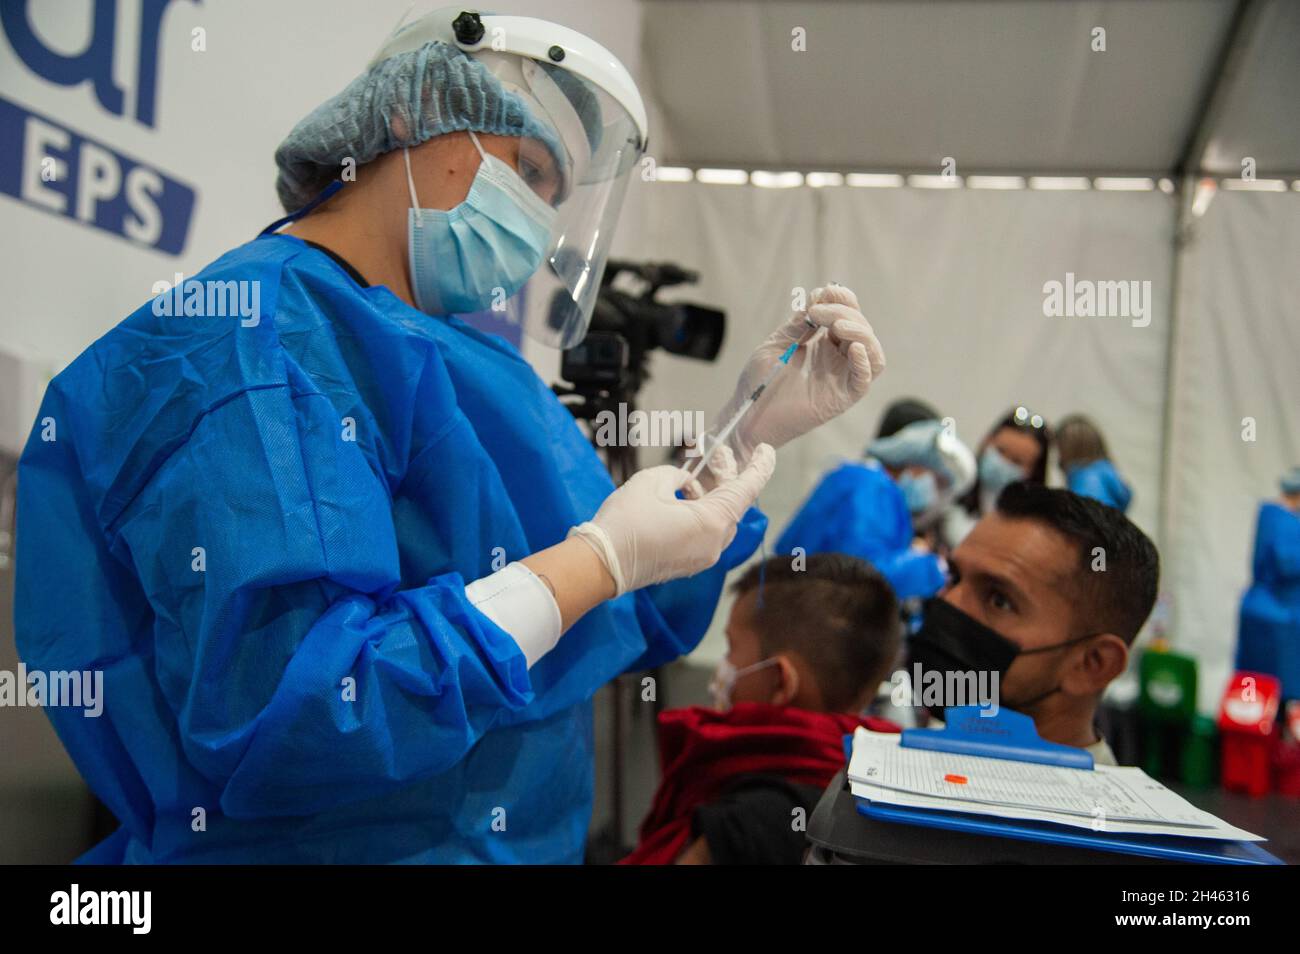 A nurse gets a dose out of the SINOVAC Vaccine vial as the Colombian government begins to vaccinate children between ages 3 to 11 against the Coronavirus disease (COVID-19) with the China's SINOVAC vaccine, in Bogota, Colombia on October 31, 2021. Stock Photo